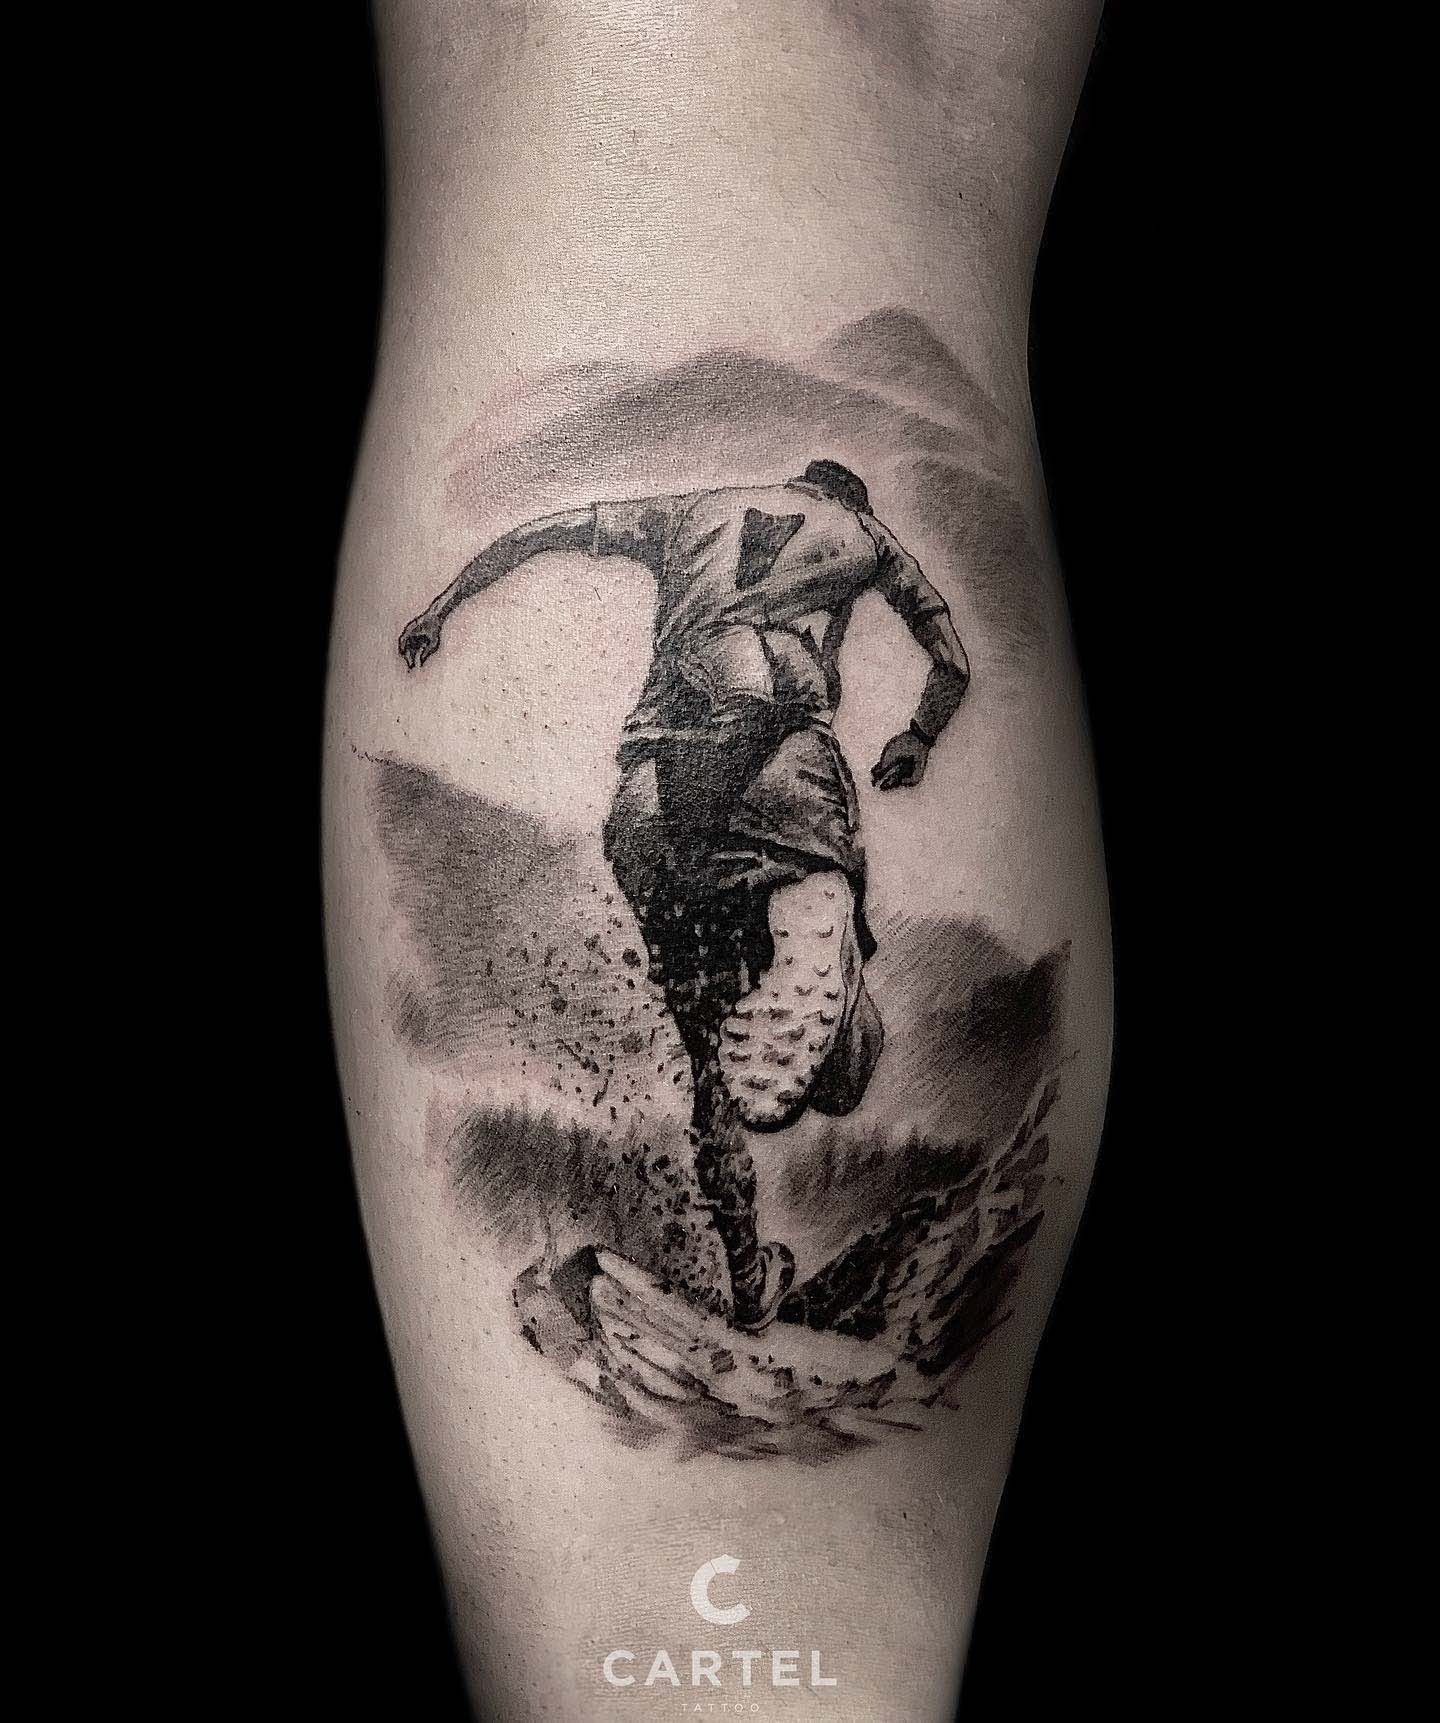 Stunning tattoos of the 2022 World Cup soccer stars